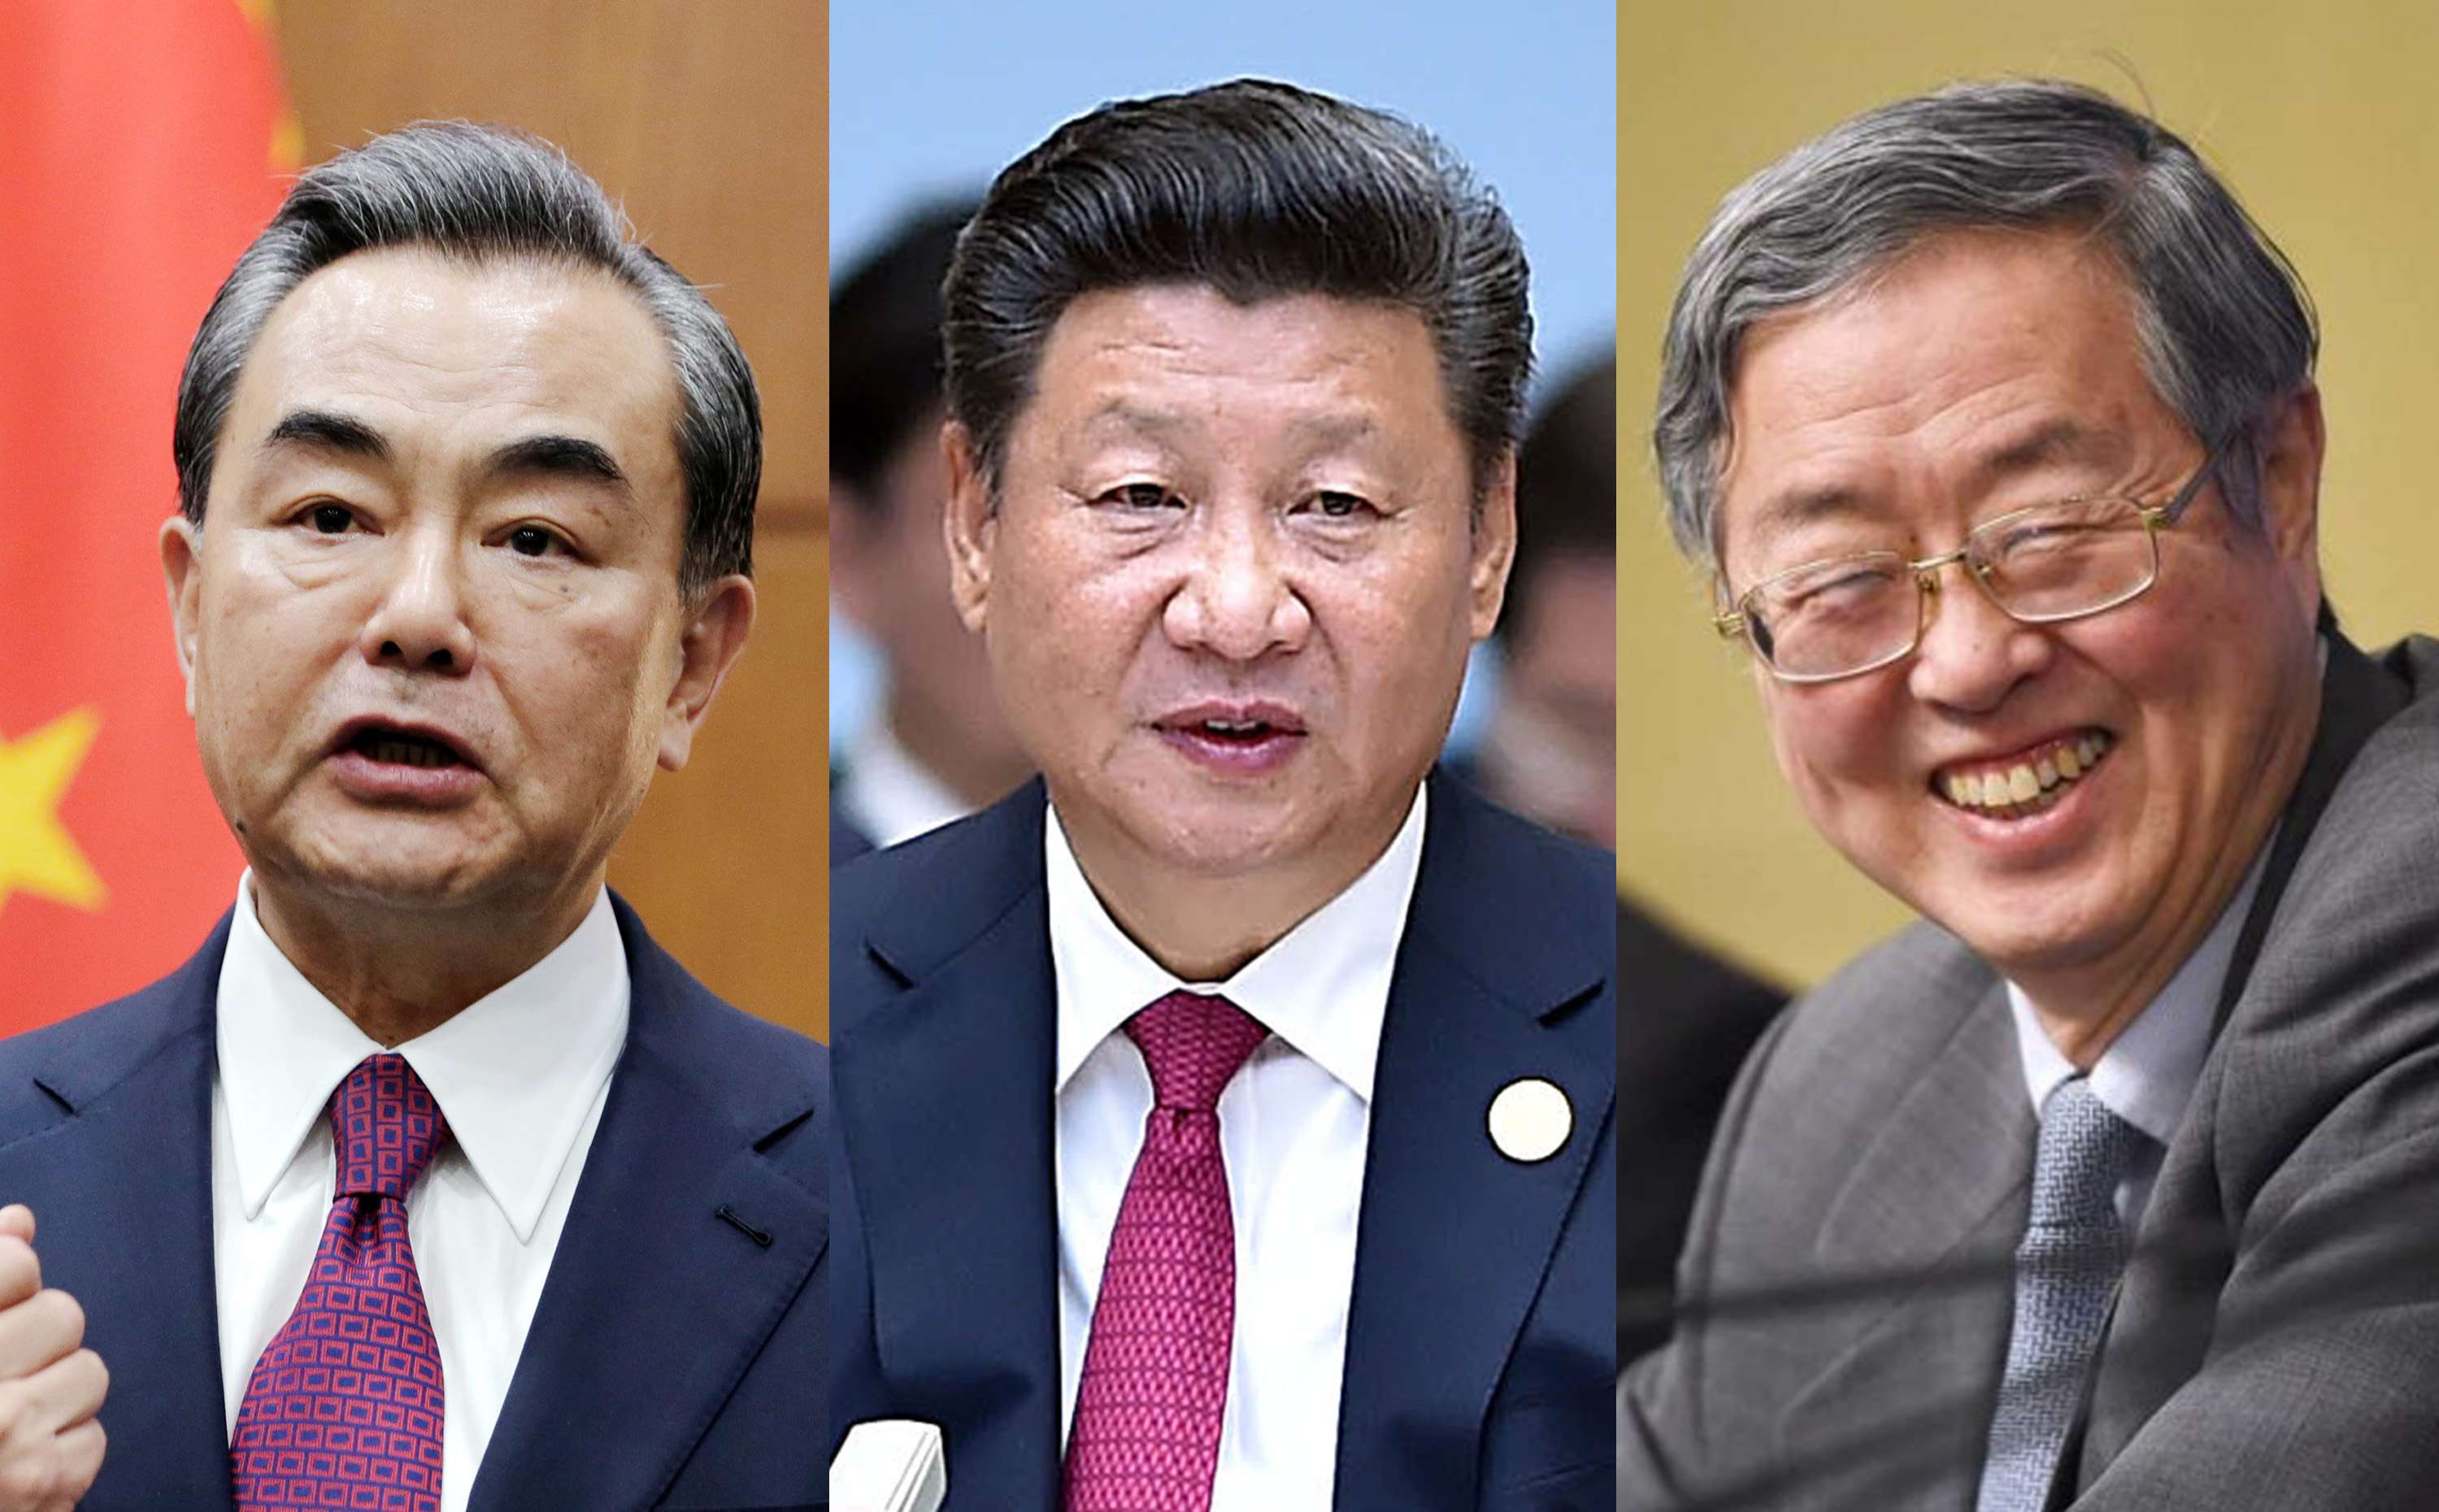 The presidential entourage at big international events gives a glimpse of the power players in Chinese politics